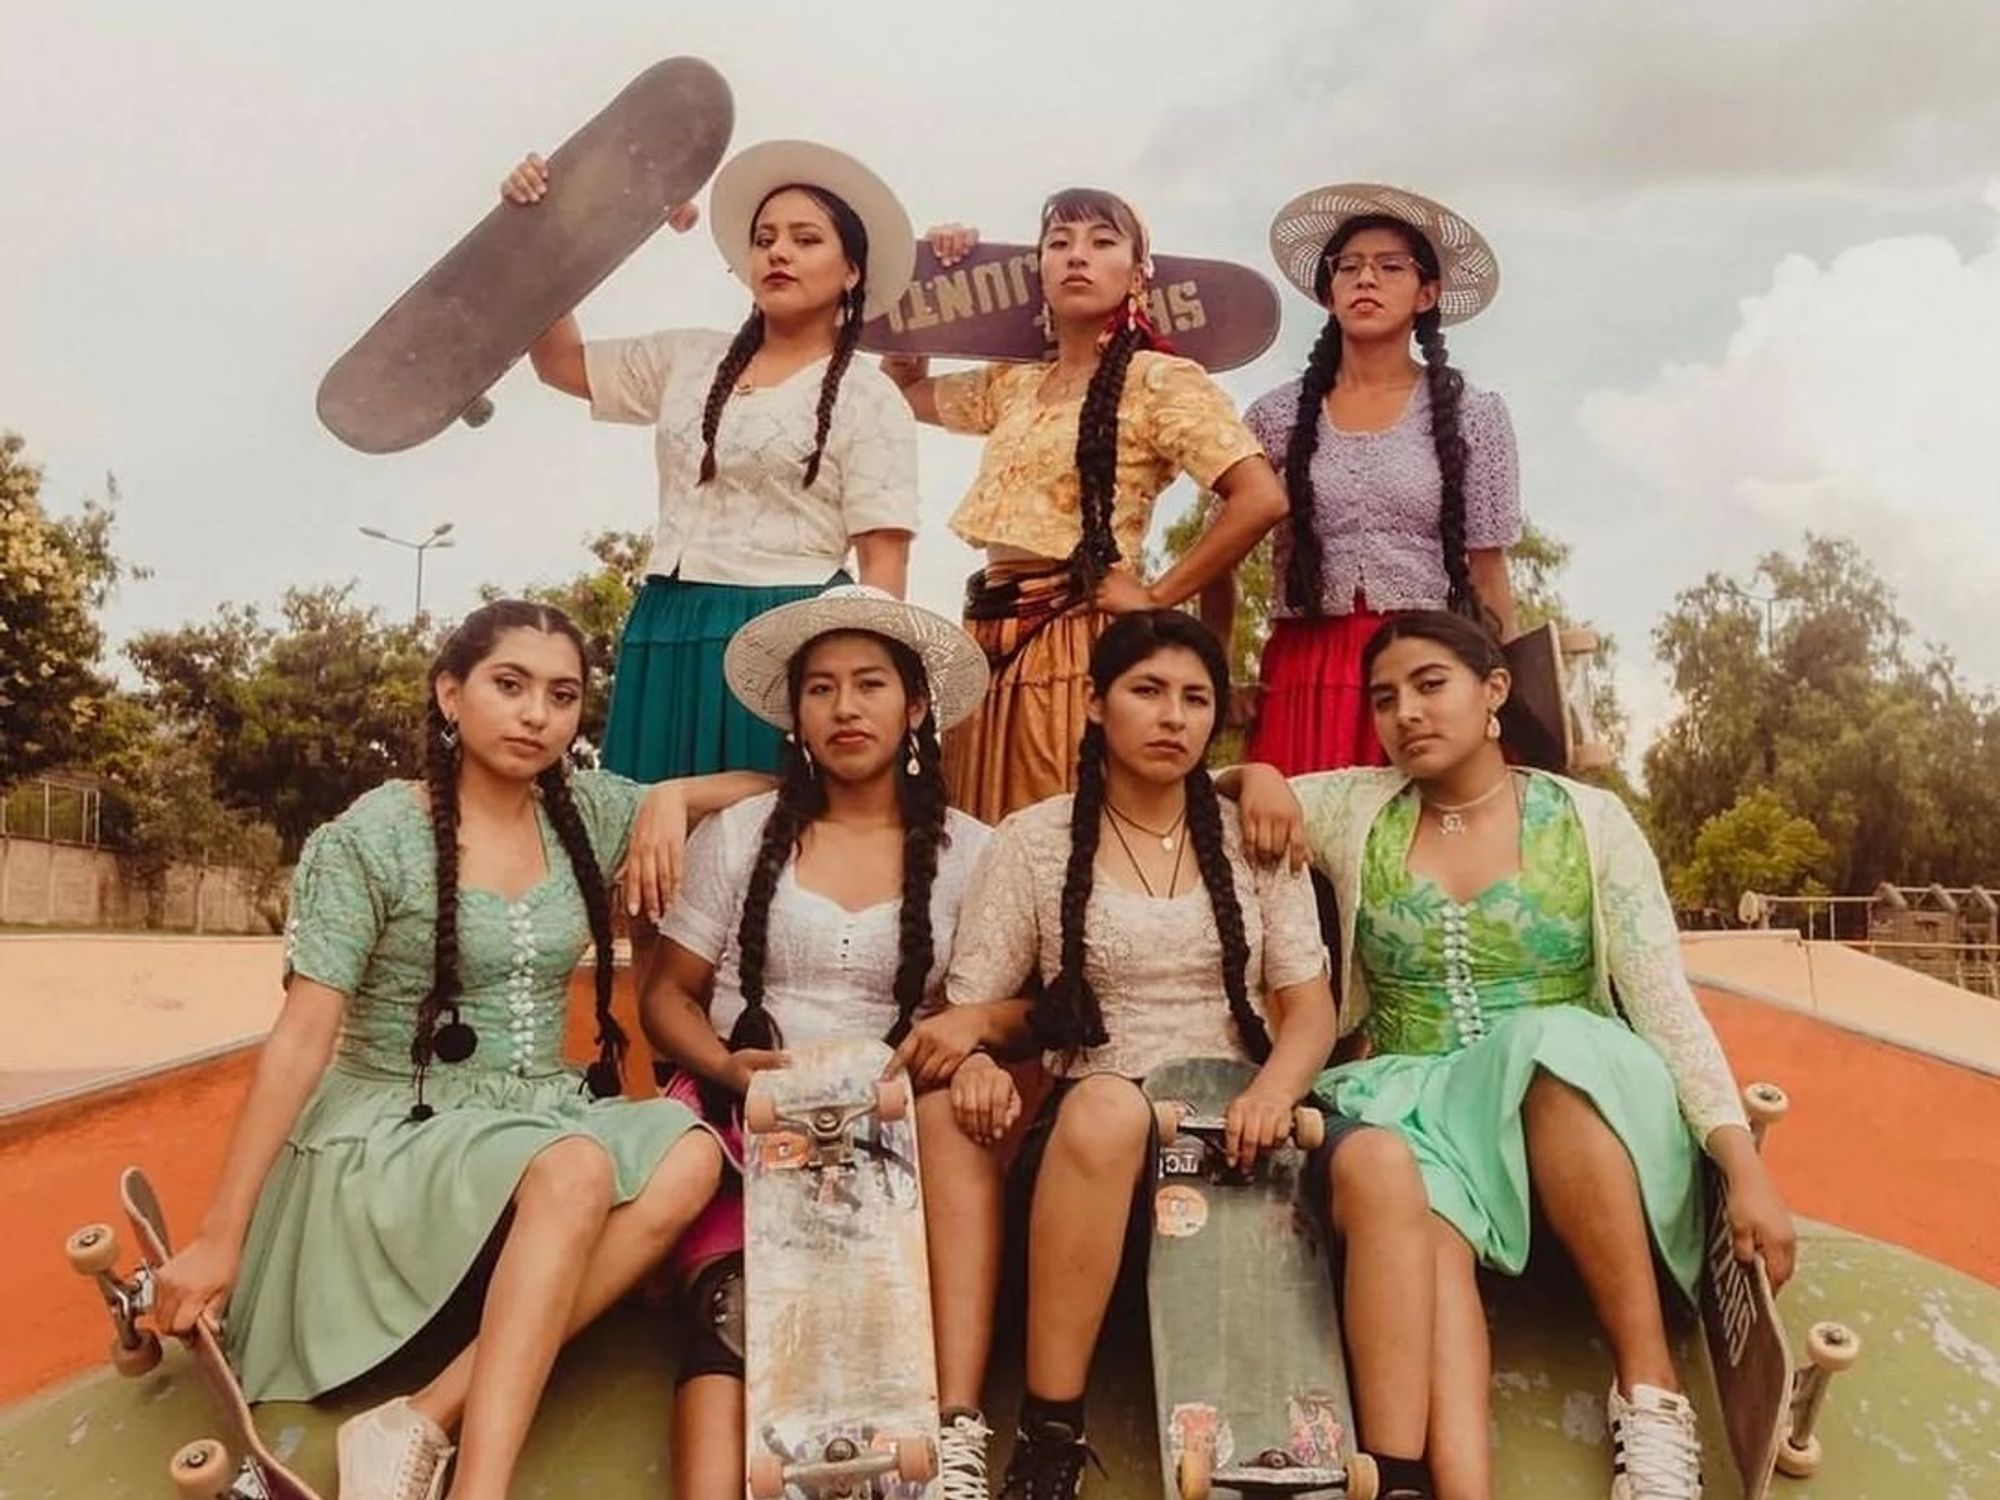 Bolivian cholitas, dressed in their traditional attire holding skateboards, showcasing their identity as skilled young female skaters.